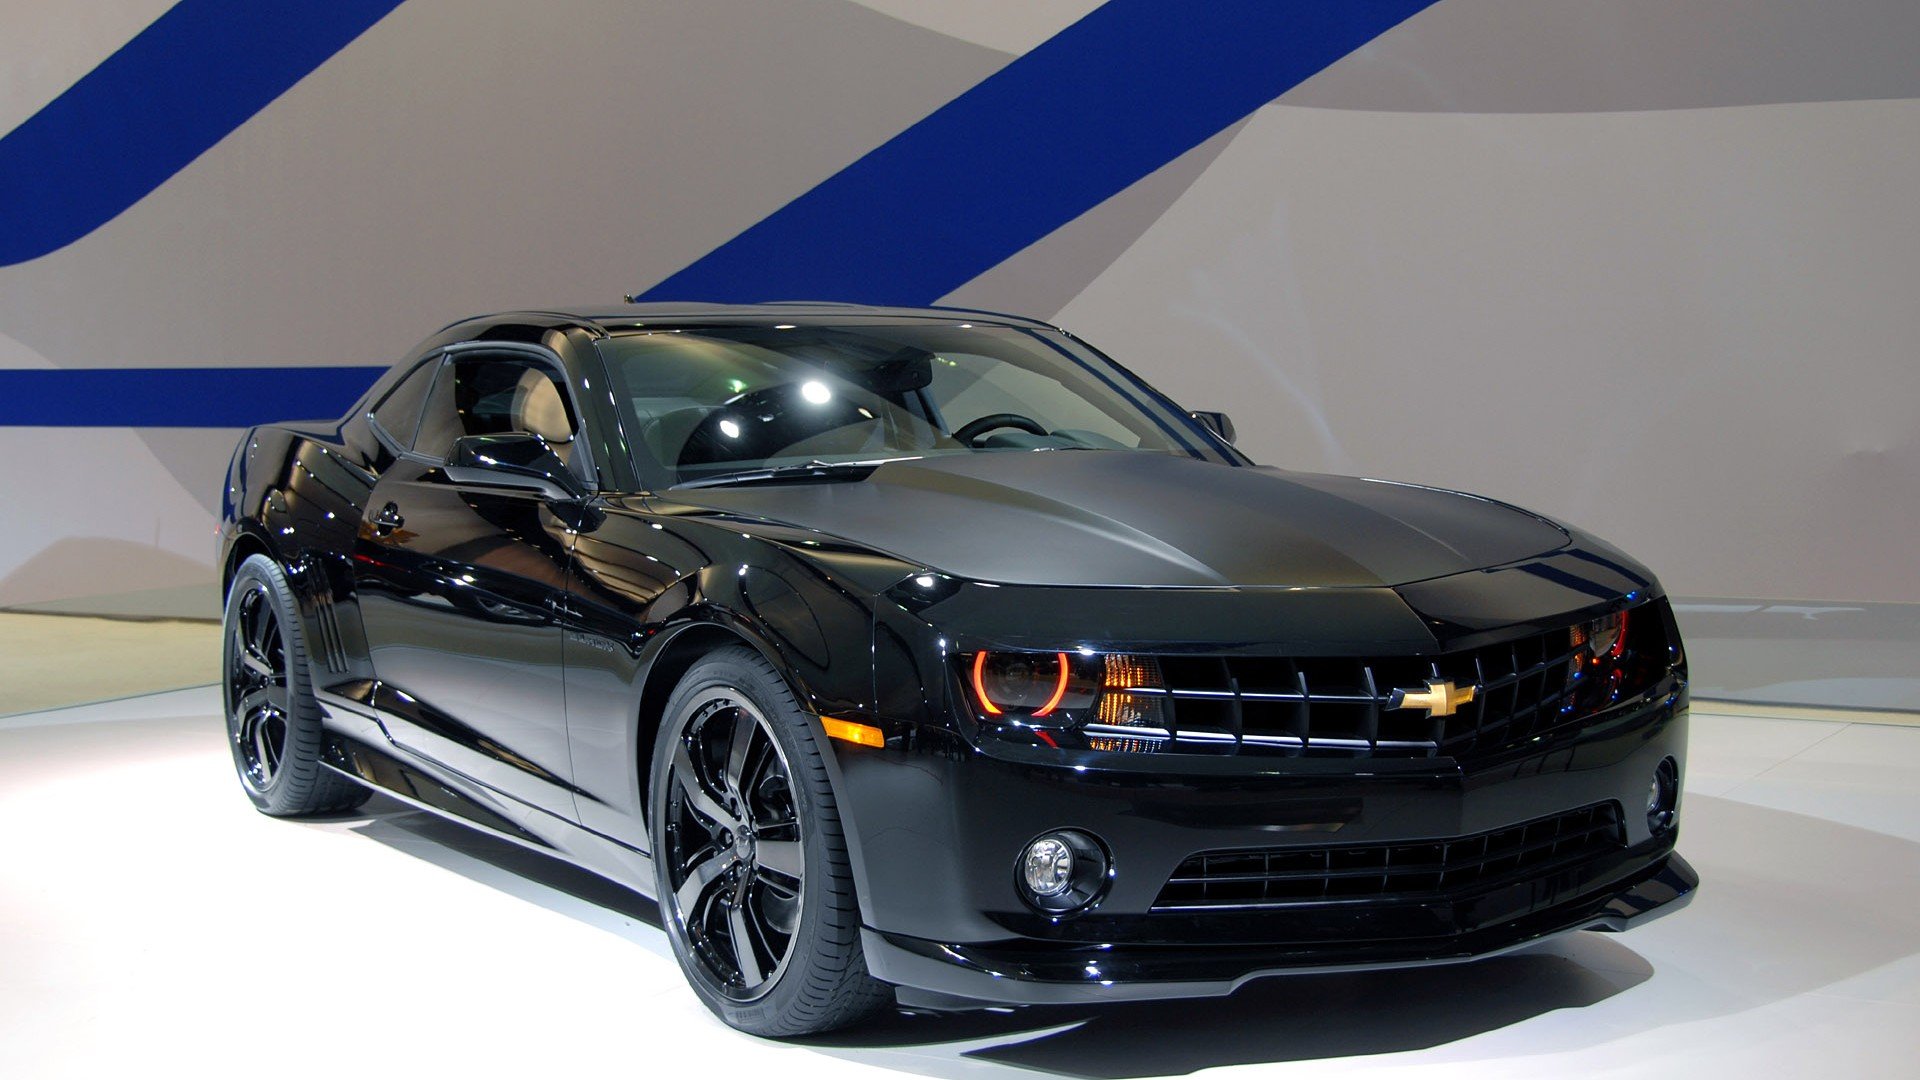 Chevrolet Chevy Wallpapers 1920x1080 Full Hd 1080p Desktop Images, Photos, Reviews